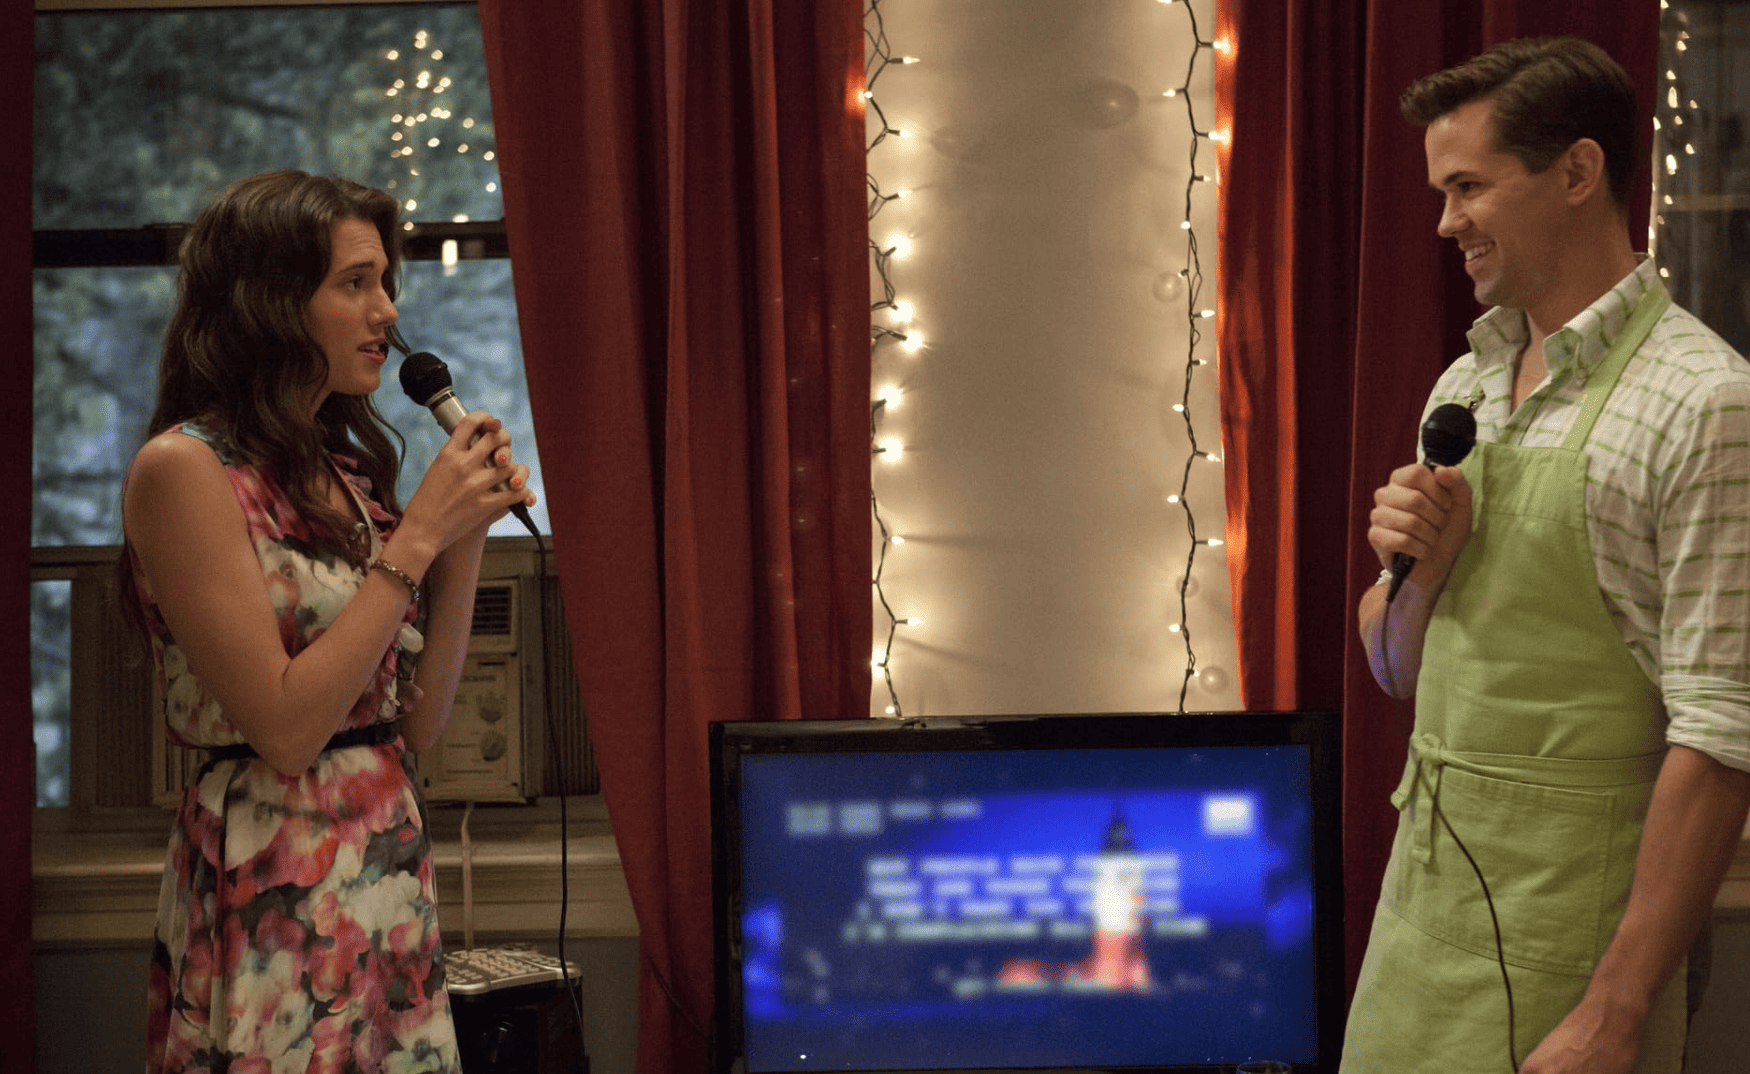 Marnie and Elijah are getting ready for a karaoke duet in this image from Apatow Productions.